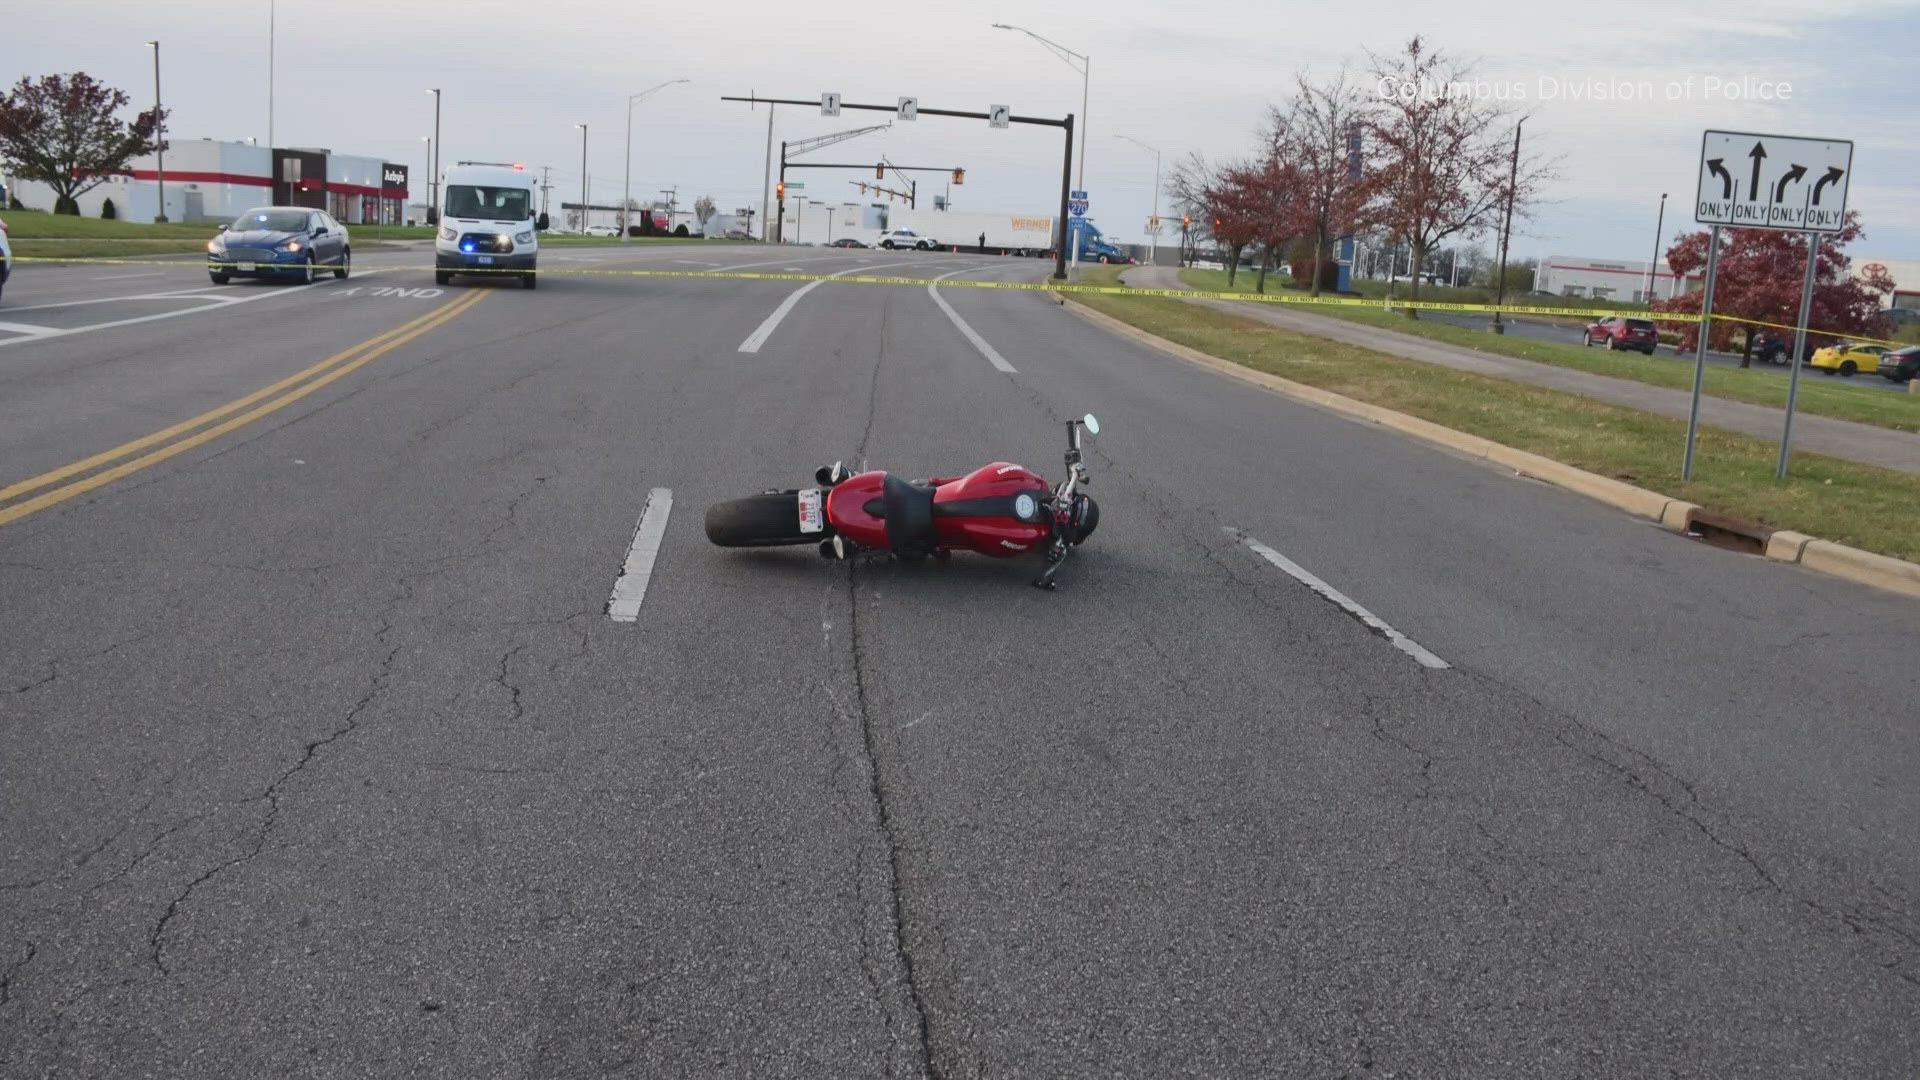 Last year, there were 230 fatal motorcycle crashes in Ohio. Of those, 25 were in Franklin County, according to the Ohio State Highway Patrol.